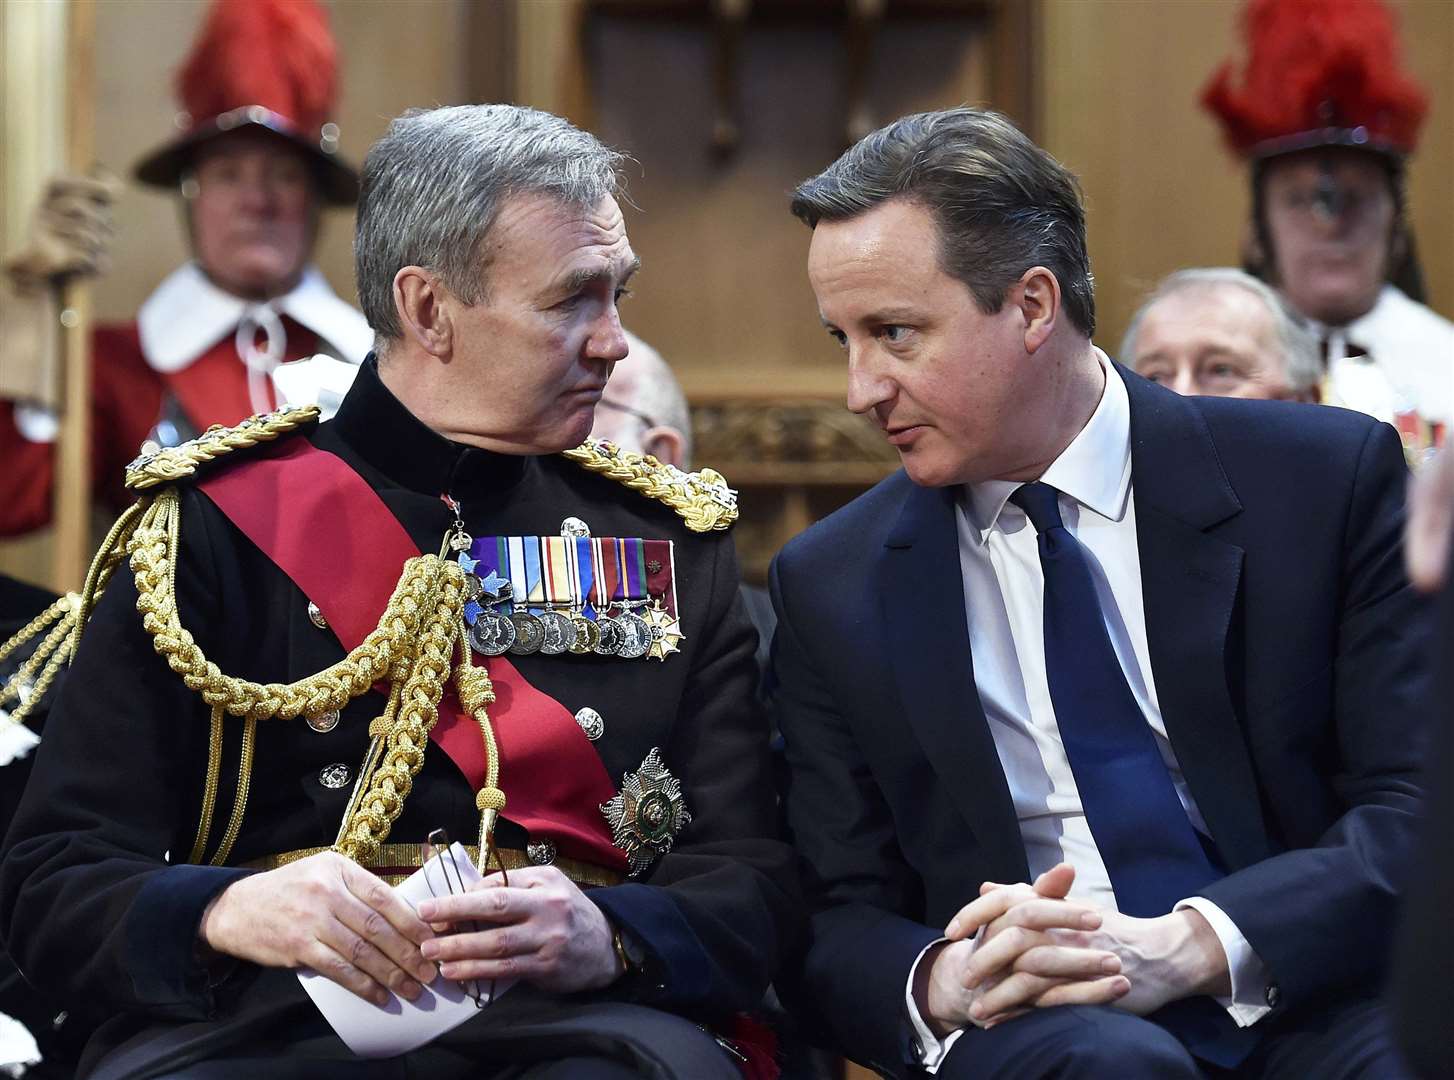 Lord Houghton with then-prime minister David Cameron. The former chief of the defence staff said he warned Mr Cameron about the increasing threat from Russia (Toby Melville/PA)